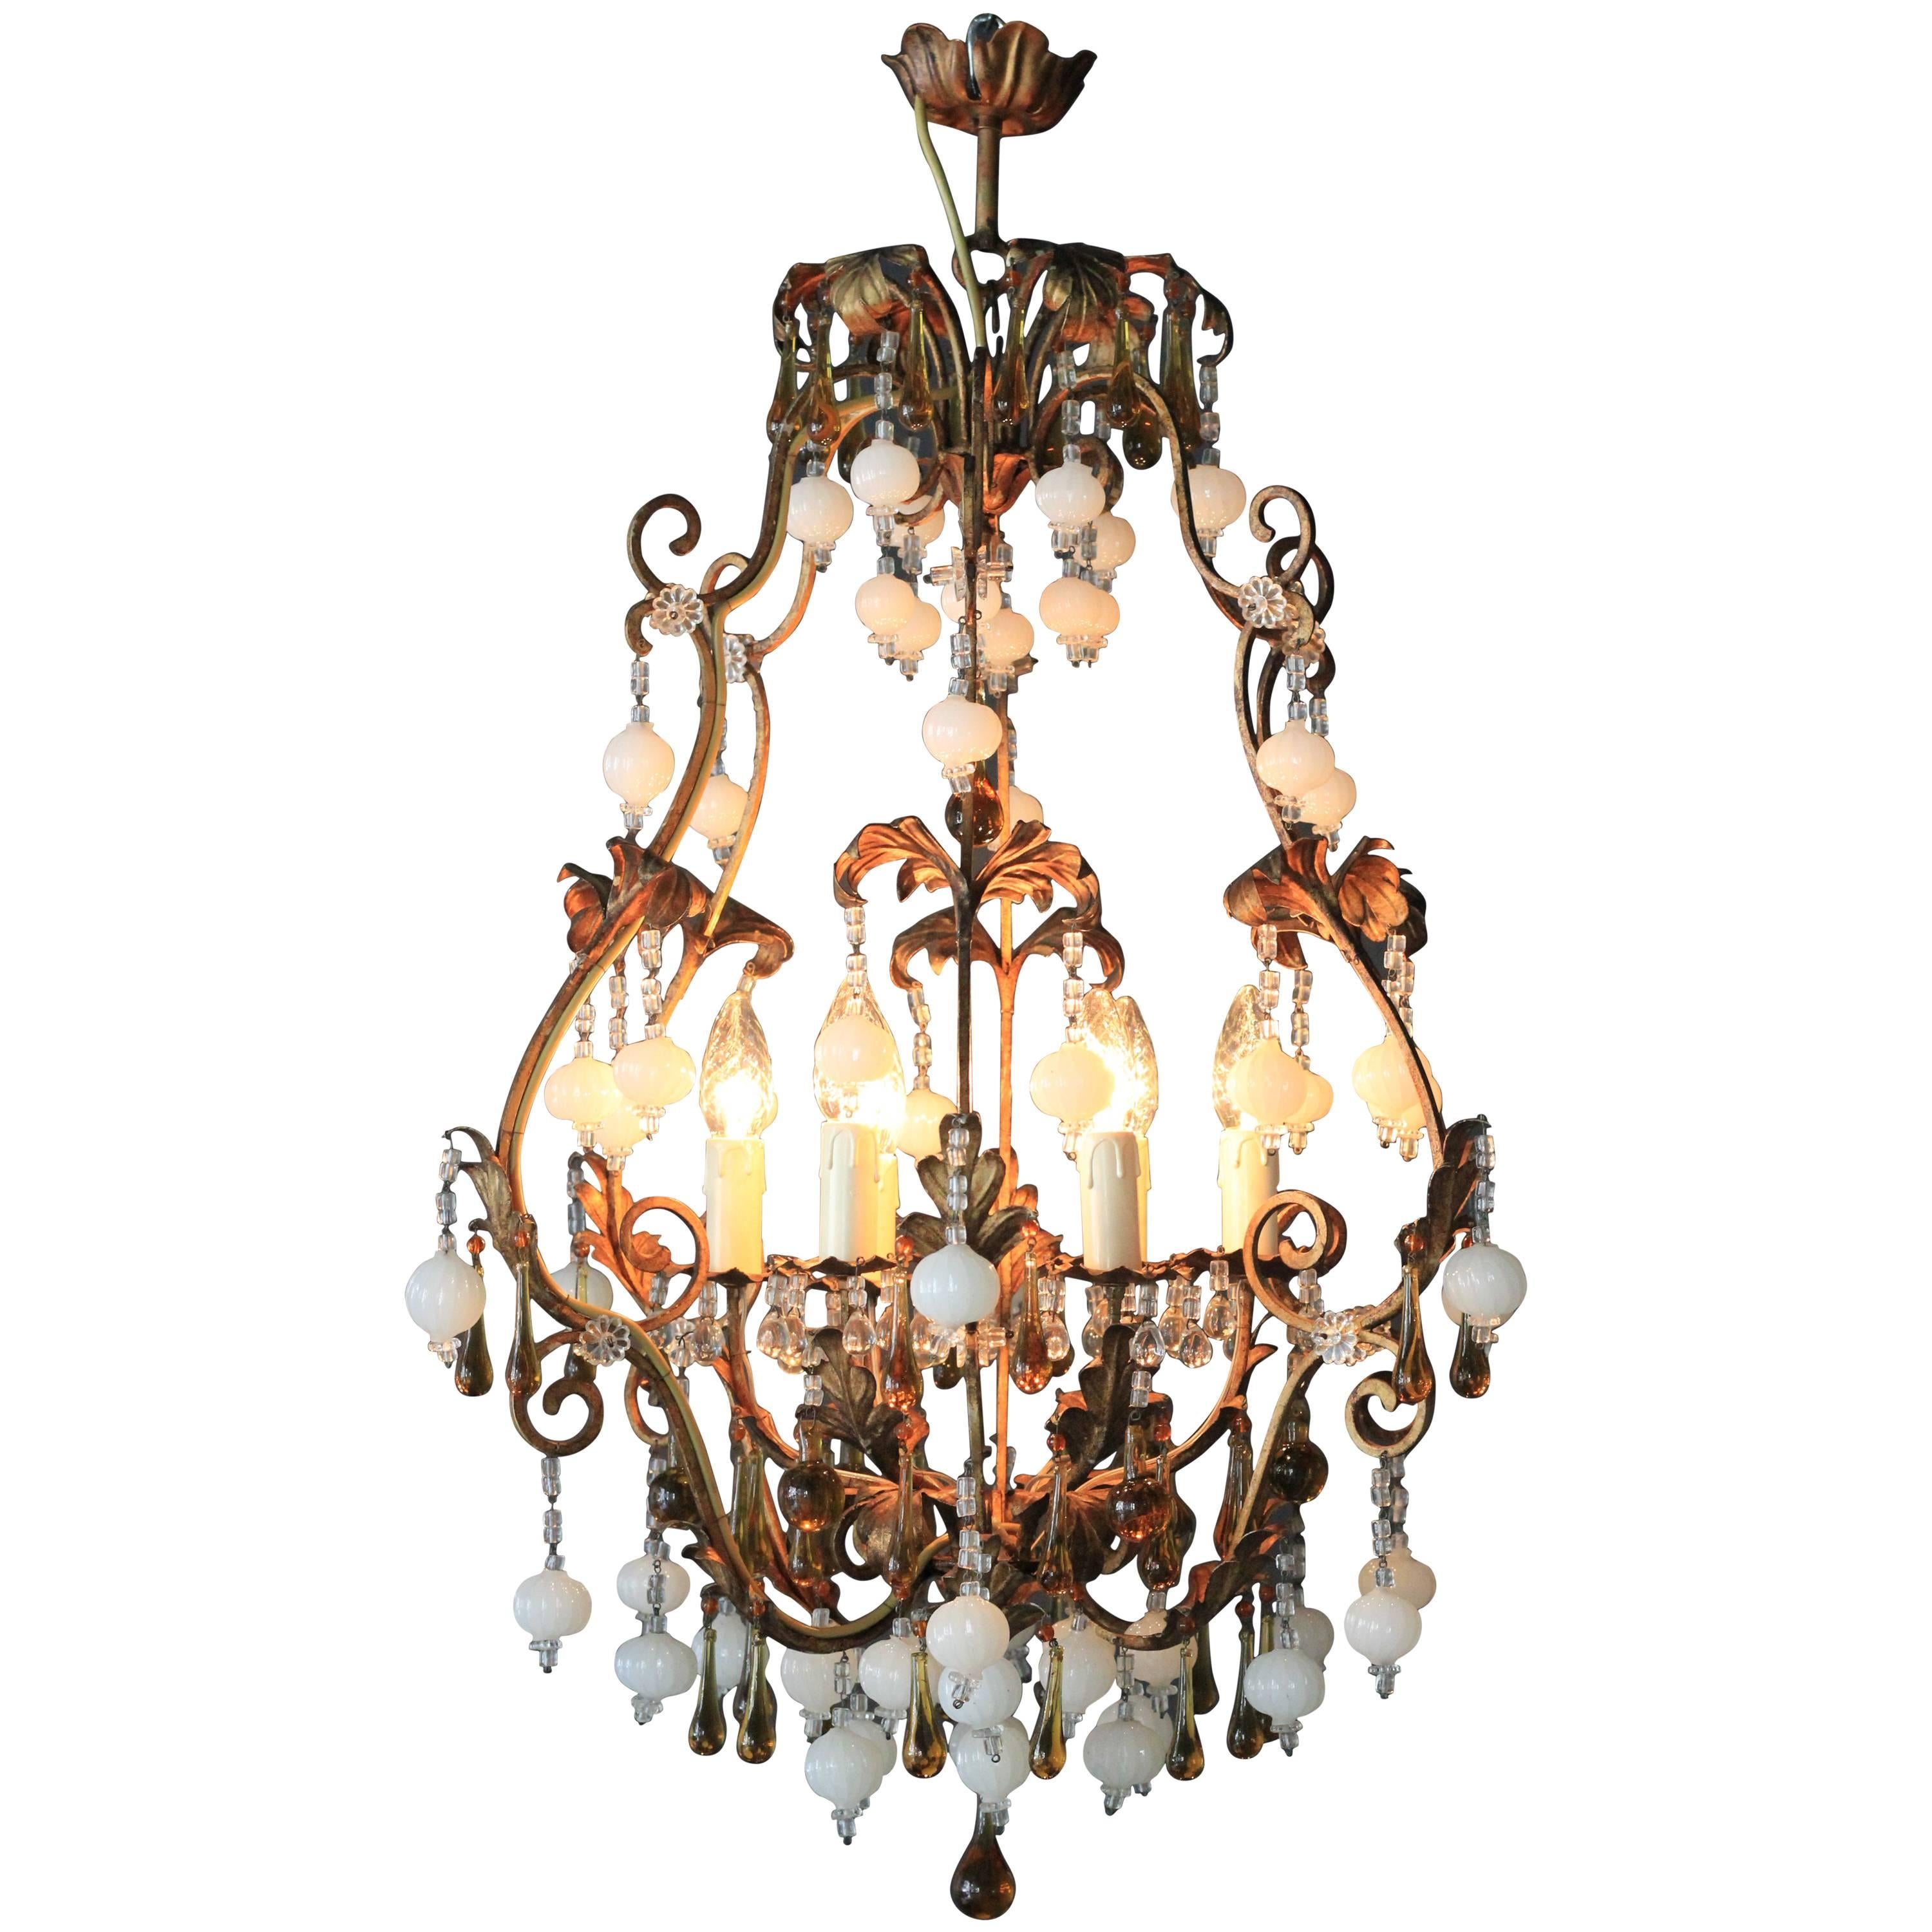 Special Murano Crystal Chandelier White and Brown Colorful Amber Lustré Cage